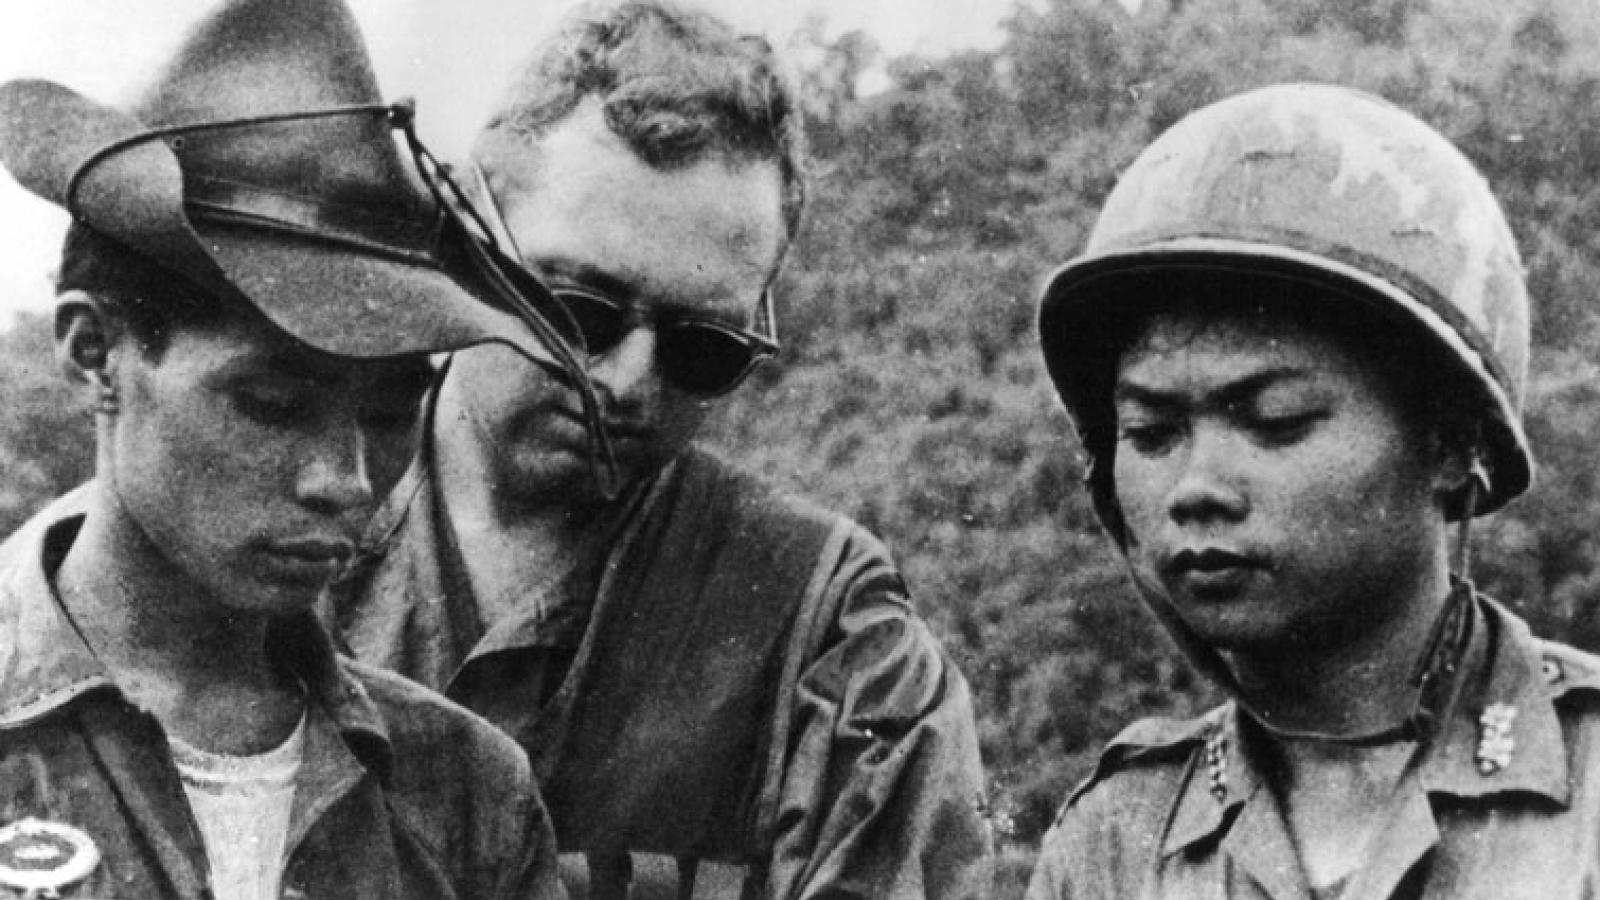 Advisor and ARVN soldiers in Vietnam